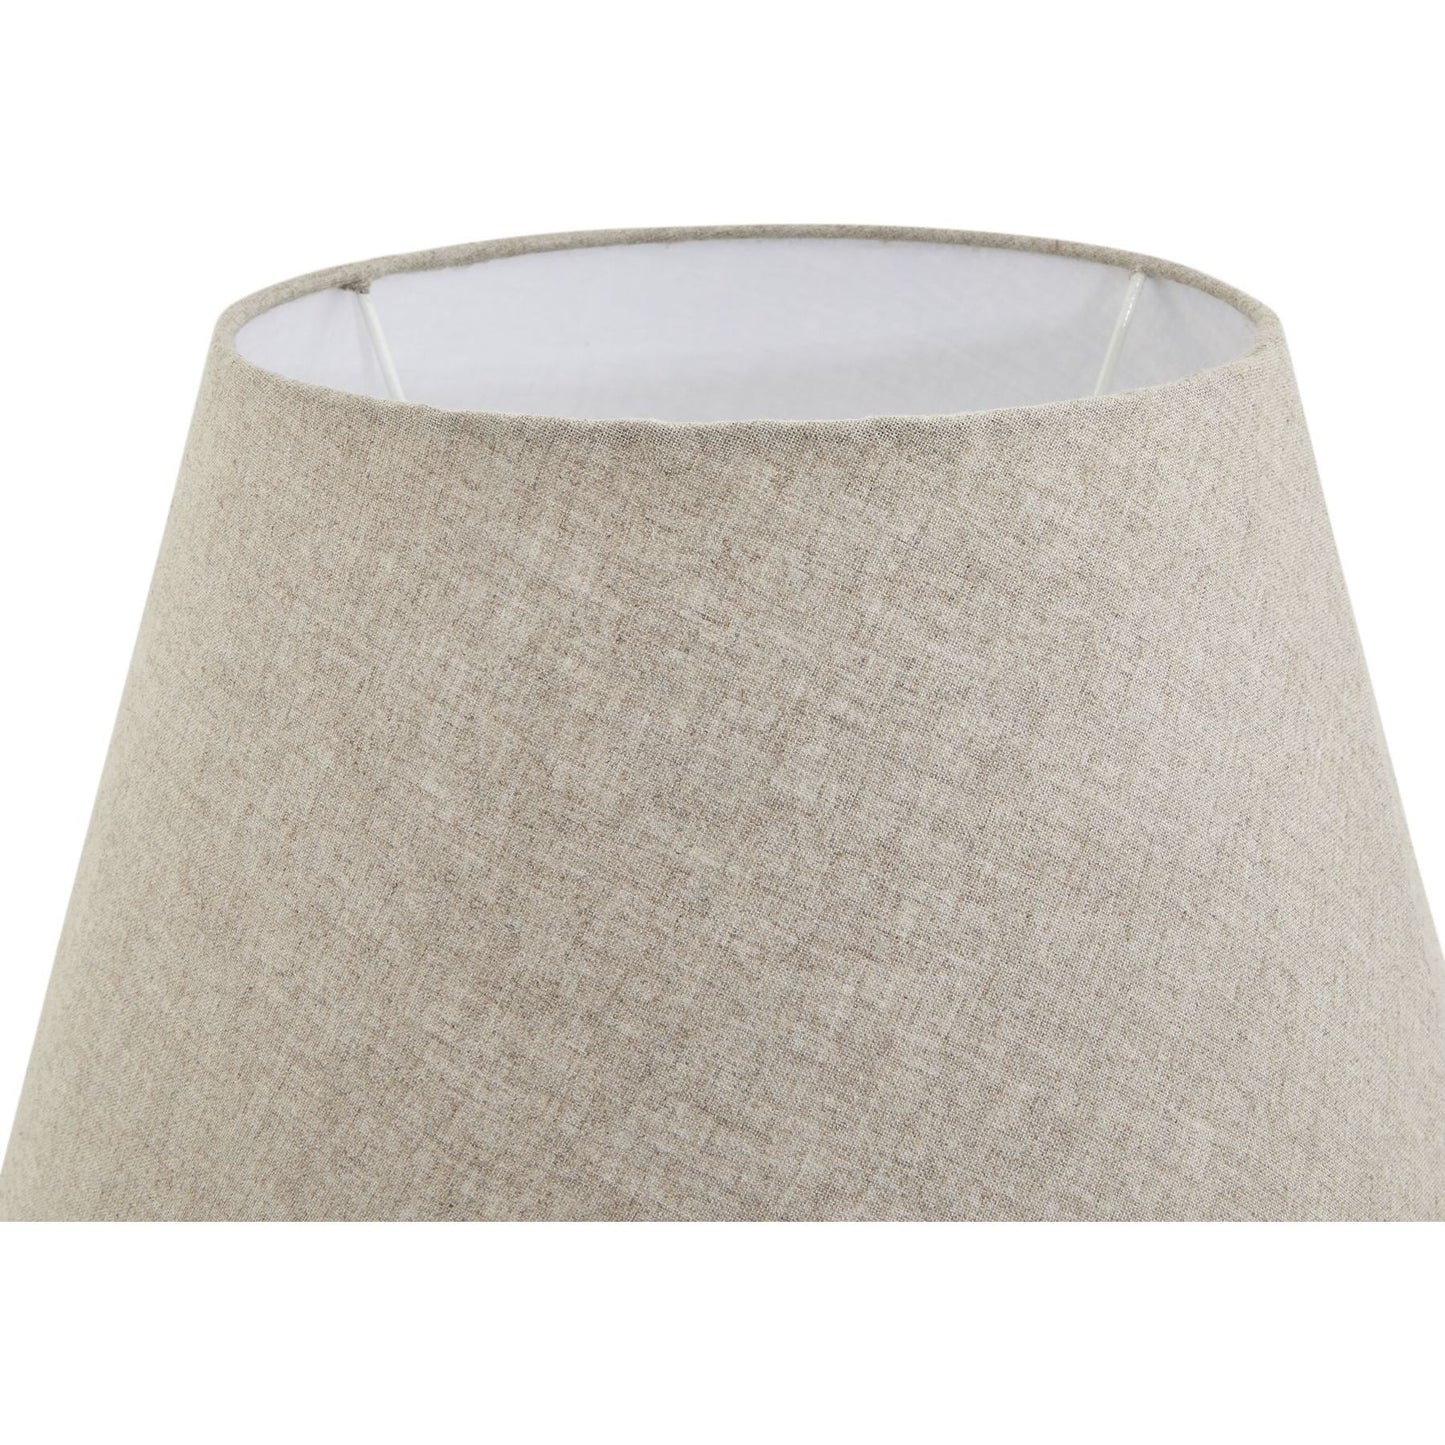 Darcy Antique White Candlestick Table Lamp With Linen Shade - Ashton and Finch